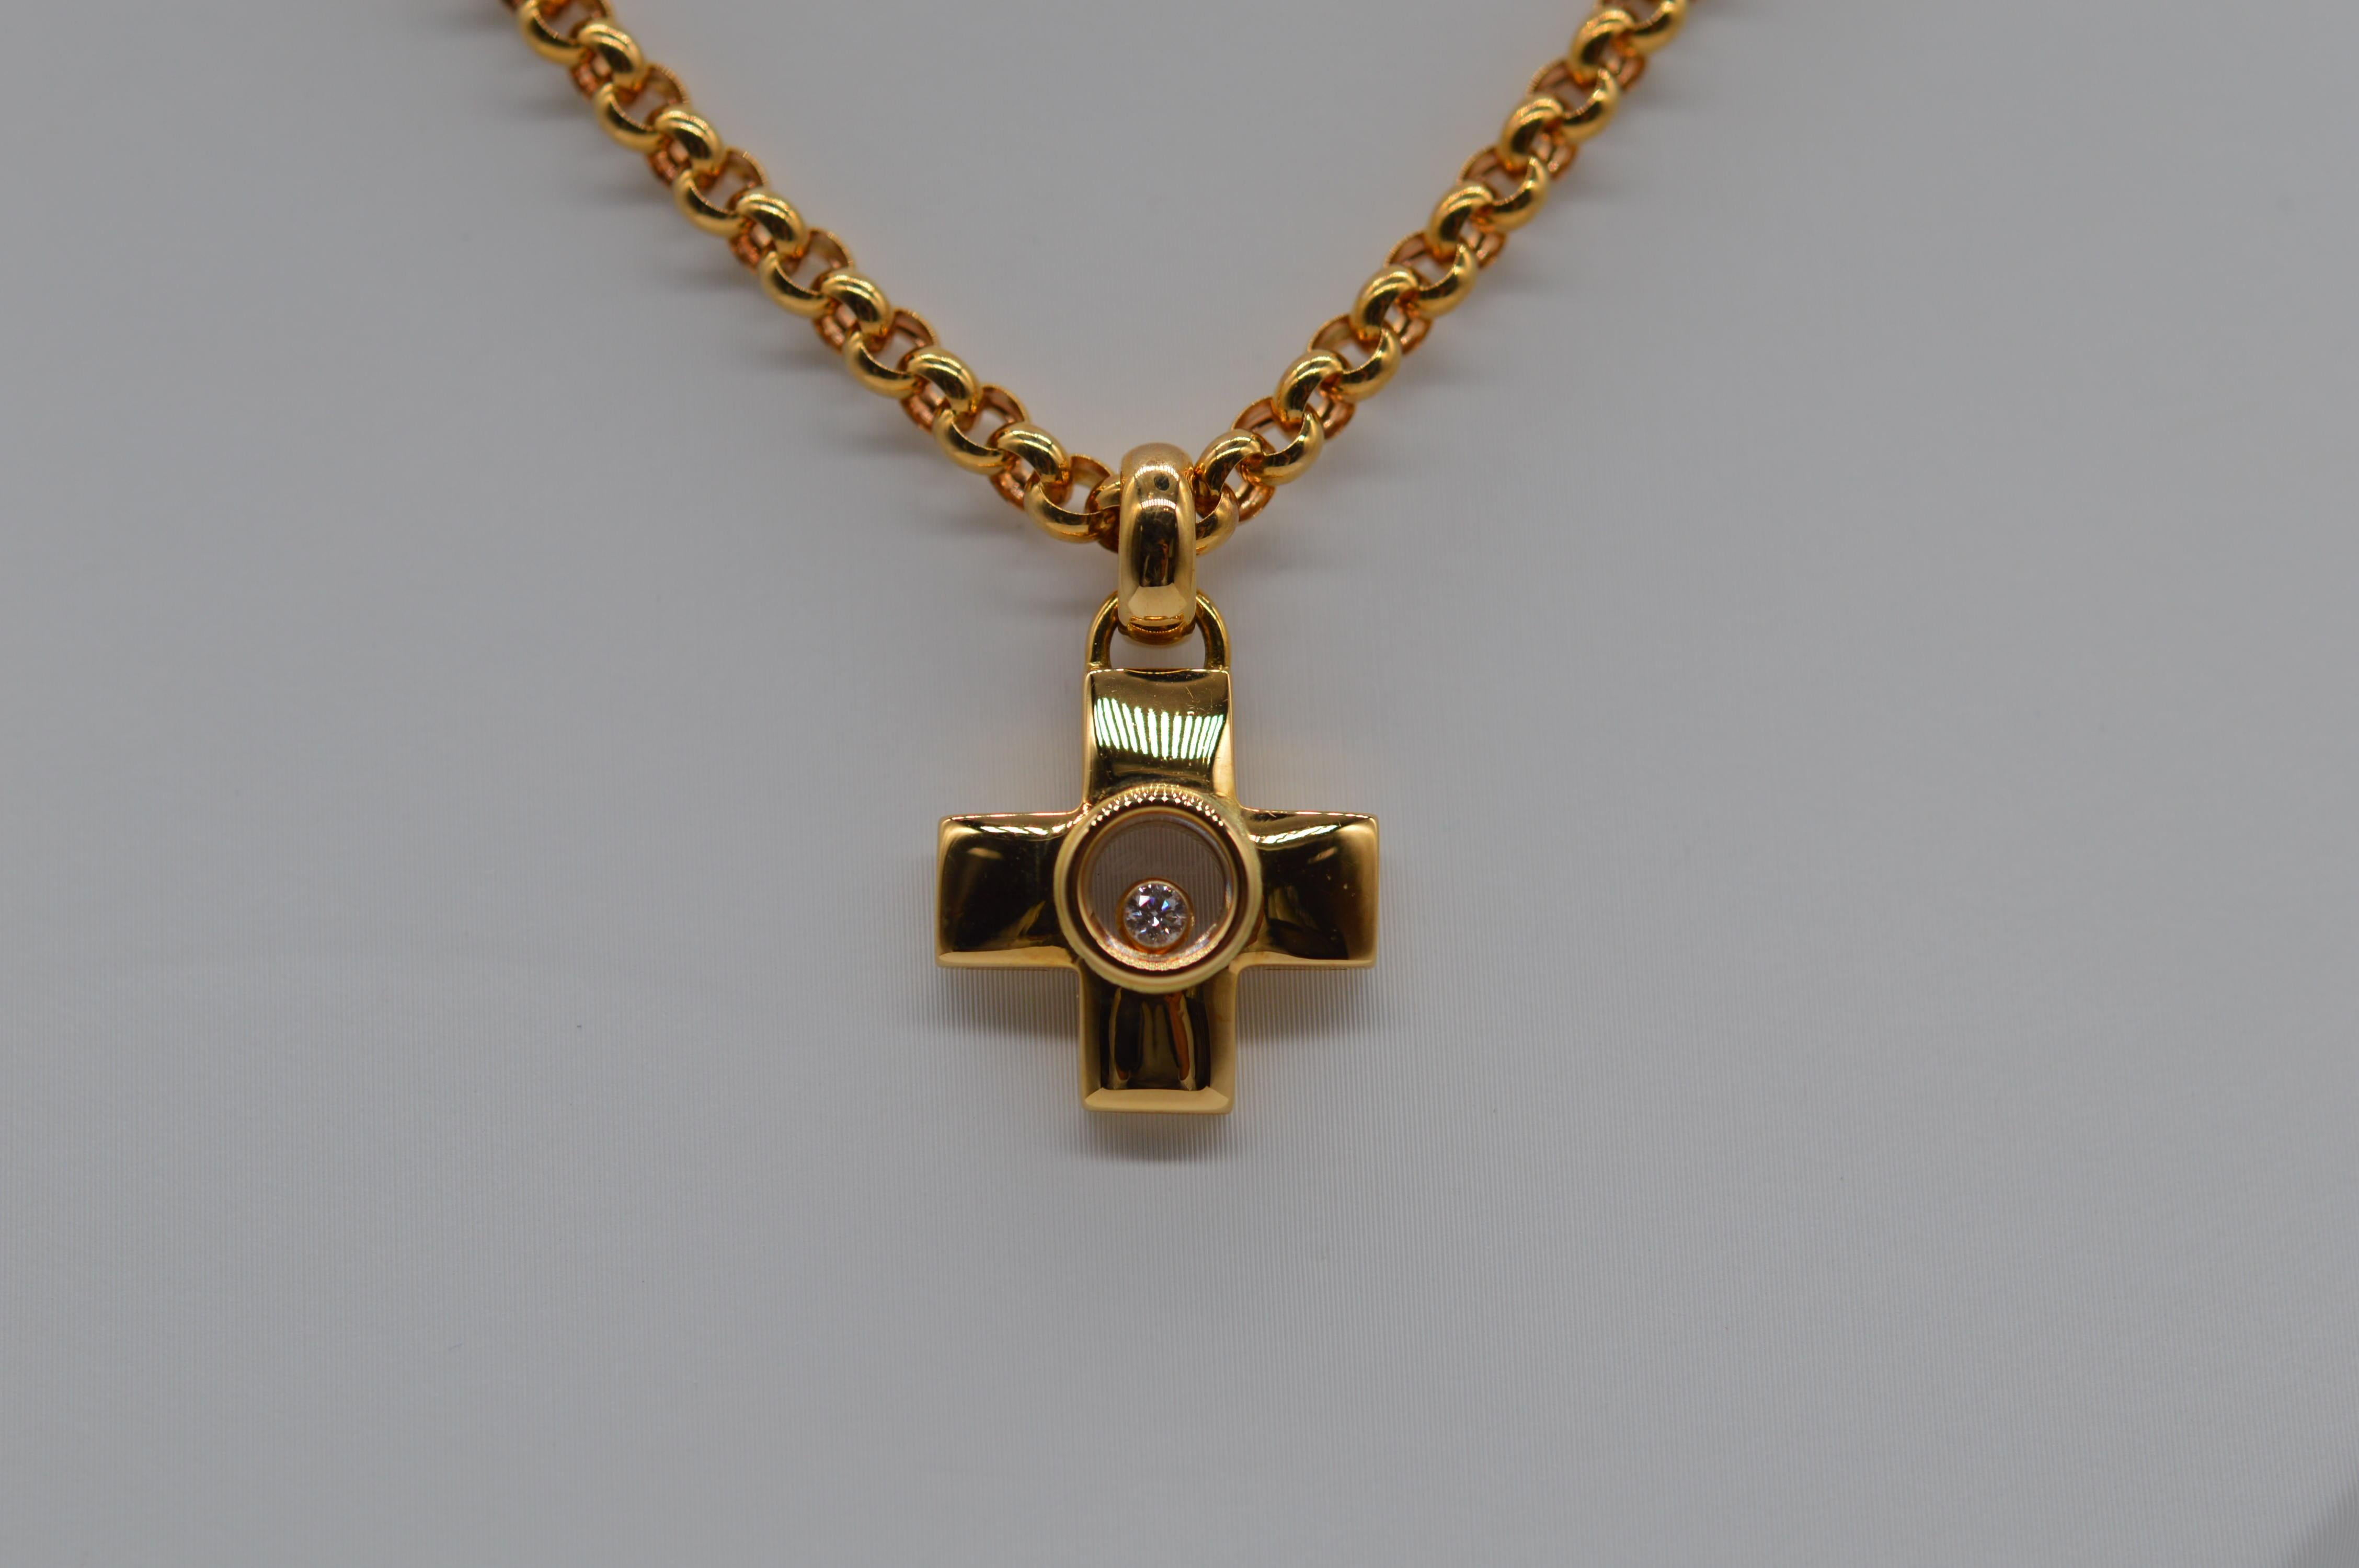 Chopard Happy Diamond Cross Pendant Unworn
18K Yellow Gold 
Weight 24.4 grams
Diamond Setting
Set with 1 Round Diamond for a total weight of 0.05 carats
Vintage unworn
With original box & certificate from Chopard
